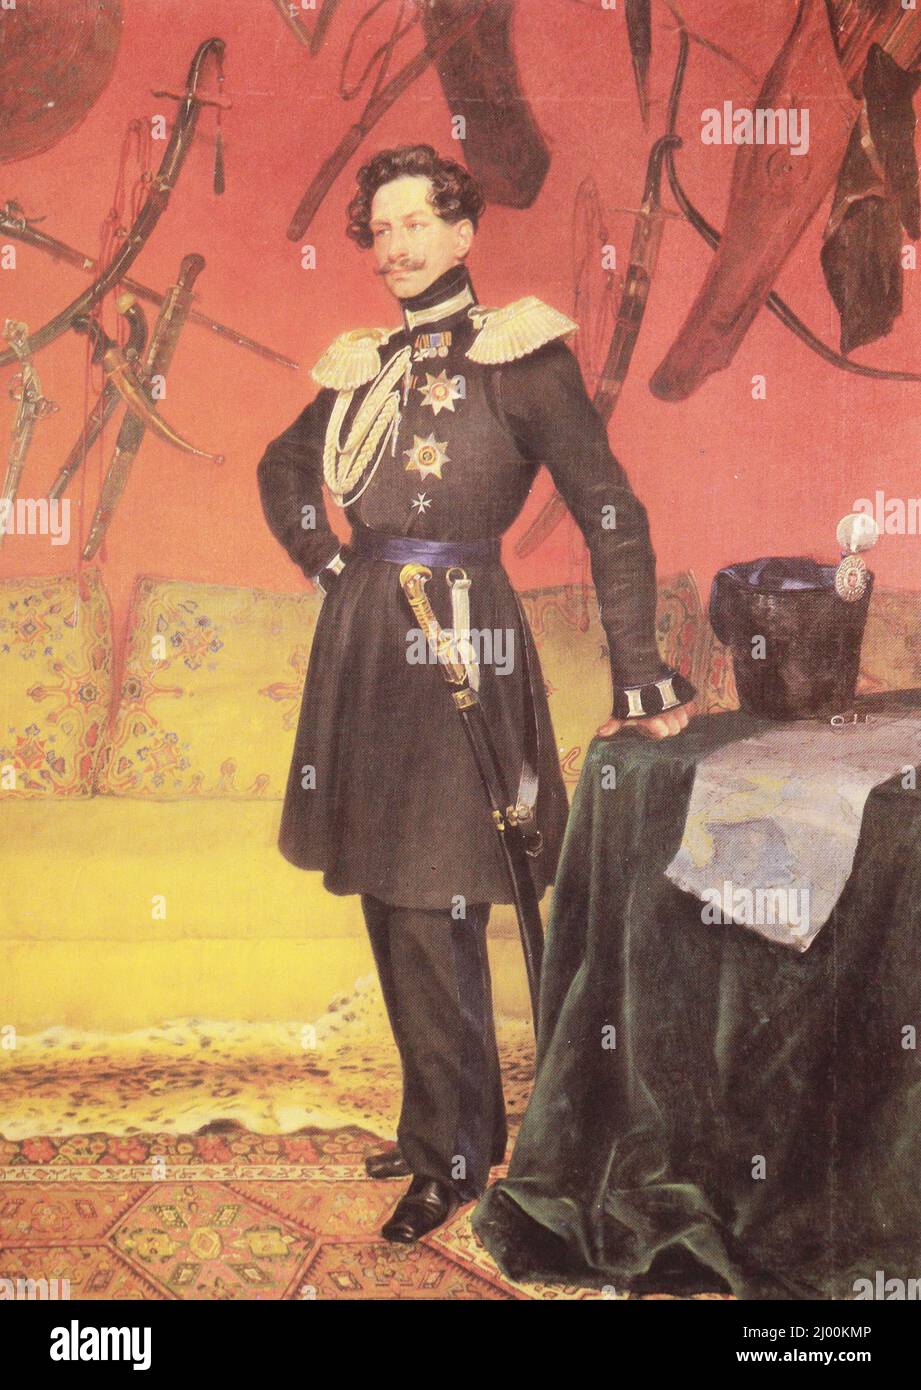 Portrait of Perovsky Vasily Alekseevich - General of the Orenburg Cossack Army of the Russian Army. Painting from the 1830s. Stock Photo